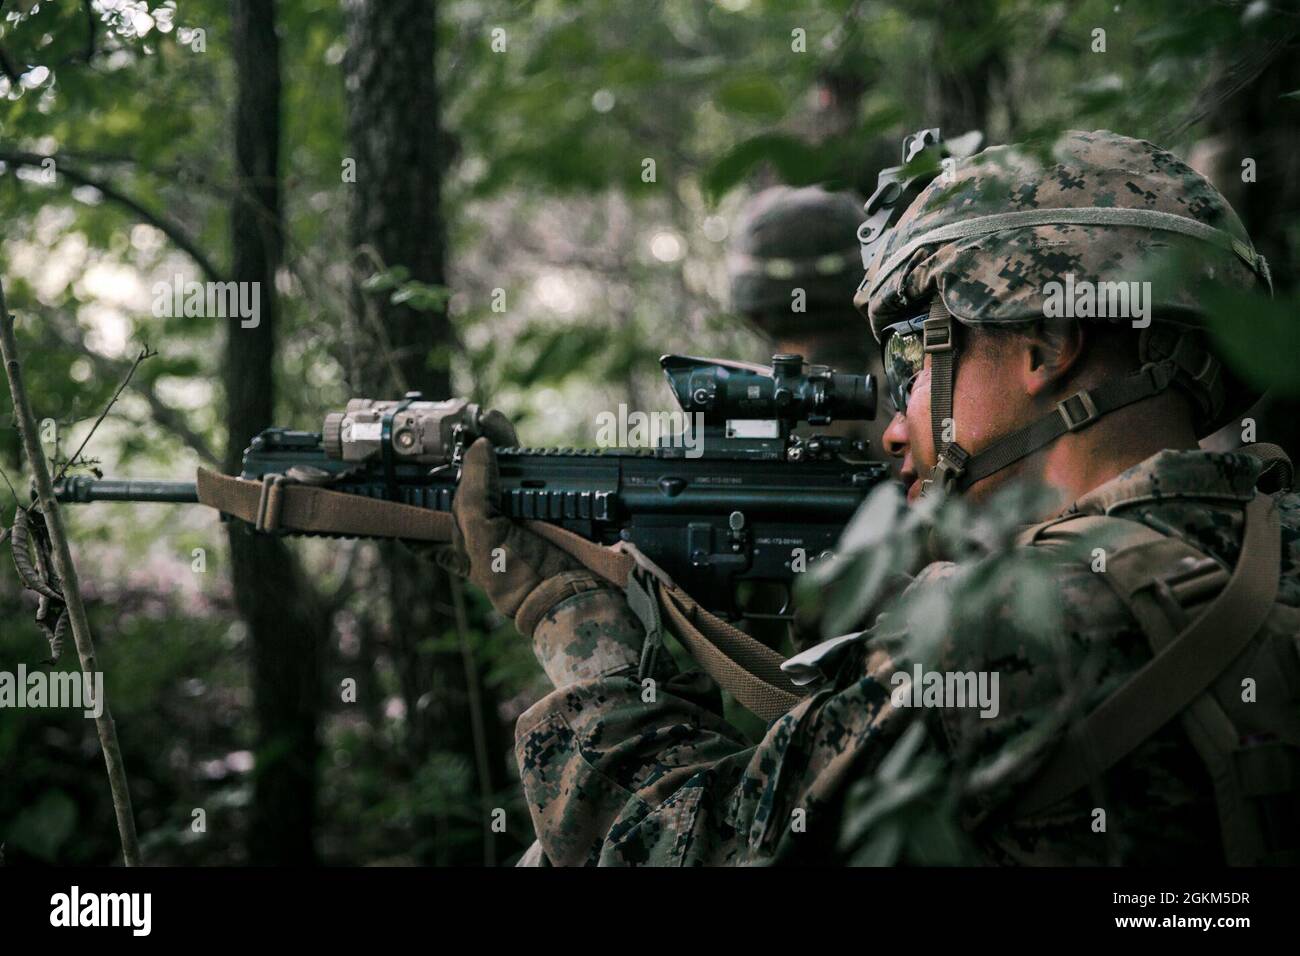 U.S. Marine Corps Pfc. Luis Reyes Quiterio, a Winston-Salem, N.C. native and a rifleman with 3rd Battalion, 2d Marine Regiment (3/2), 2d Marine Division, provides security during Exercise Raven 2-21 in Nashville, Tenn., May 22, 2021. Exercise Raven is an integrated training event with Marines from 3/2 and Marine Corps Forces Special Operations Command which simulates real-life tactical scenarios to enhance overall unit interoperability, effectiveness and lethality against an adversarial force. Stock Photo